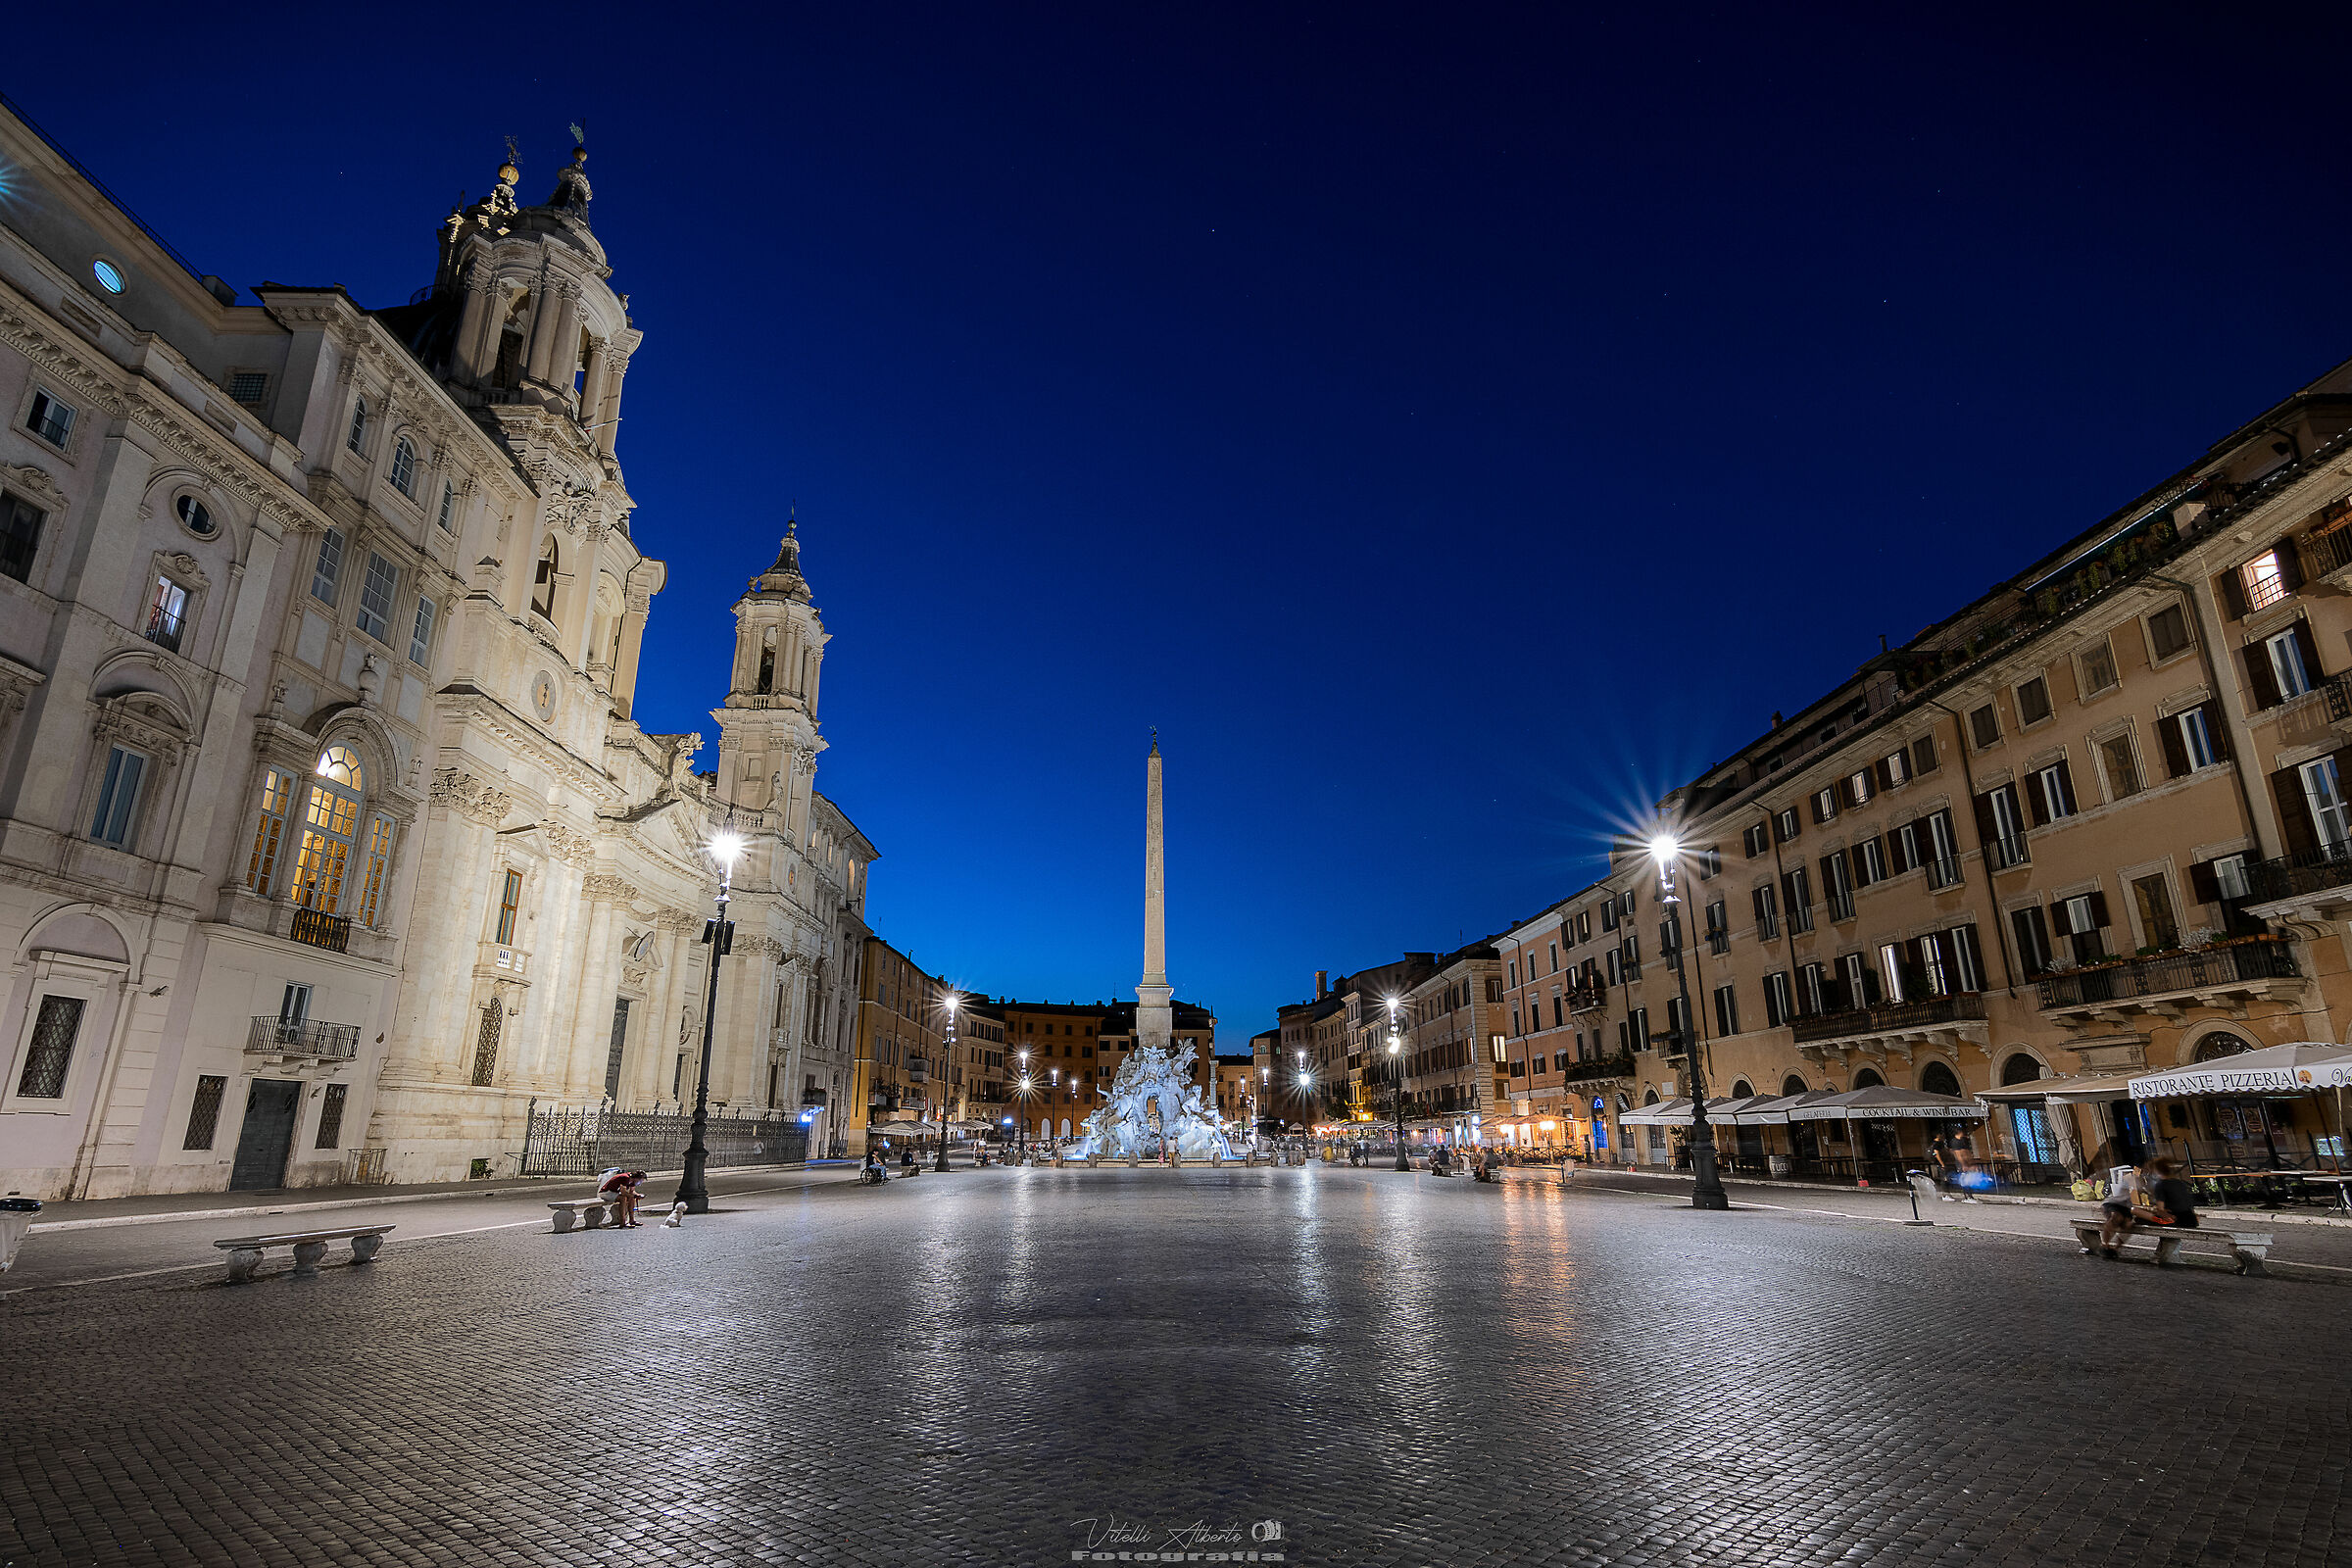 Now blue on Piazza Navona, the heart begins to pulsate again...